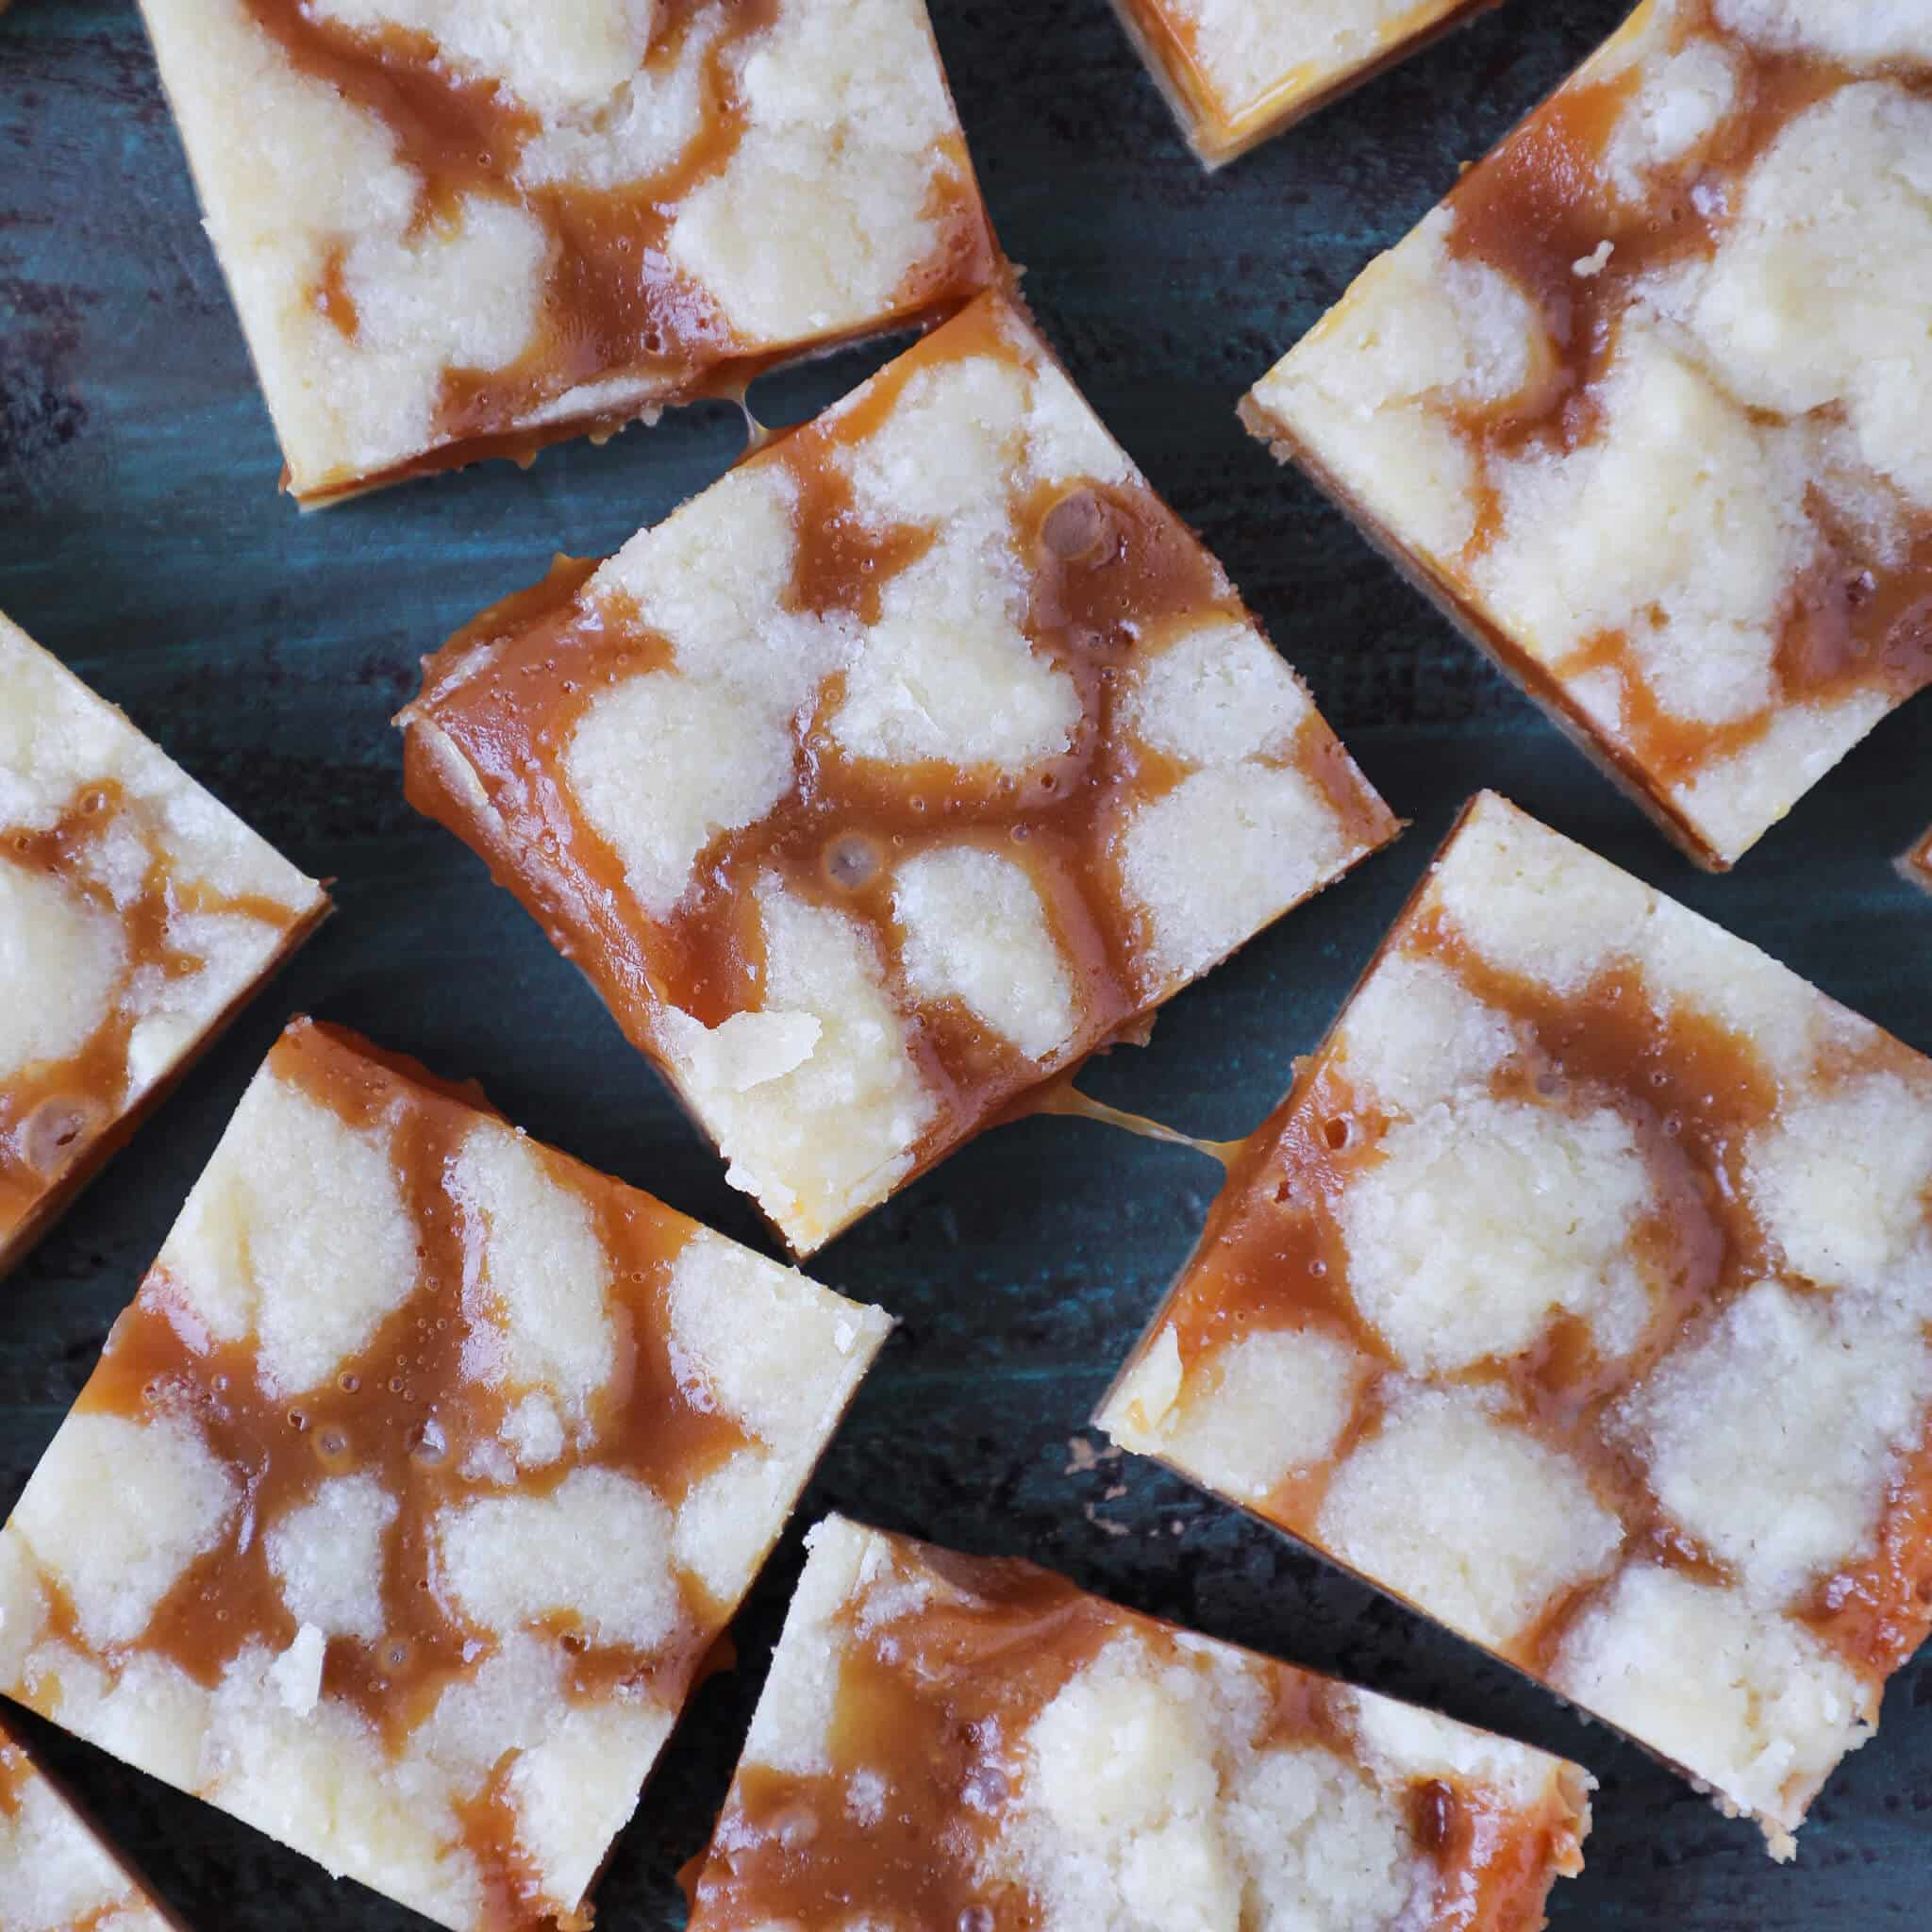 Caramel Butter Bars cut with caramel pull